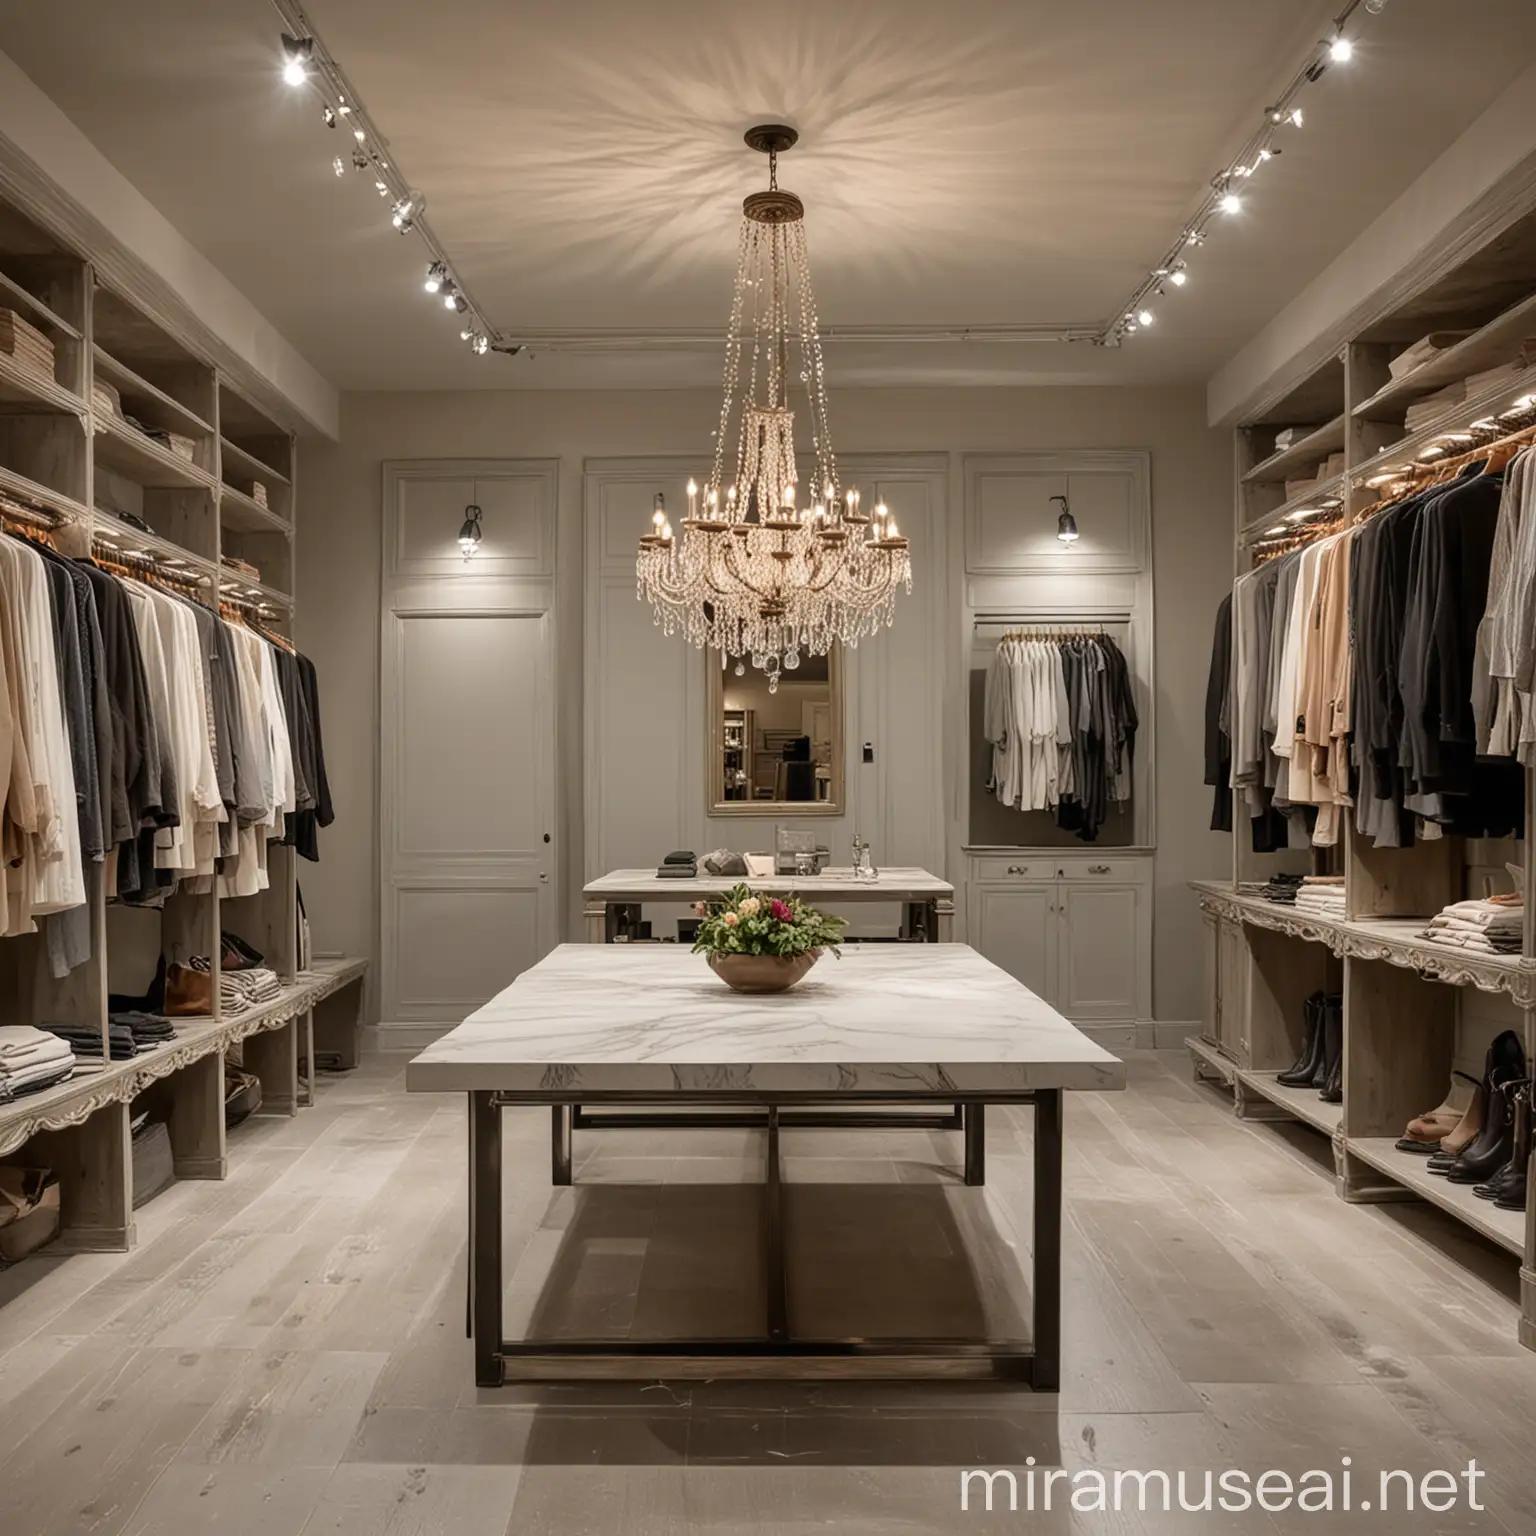 Modern Boutique Design with Warm Tones and Unique Style